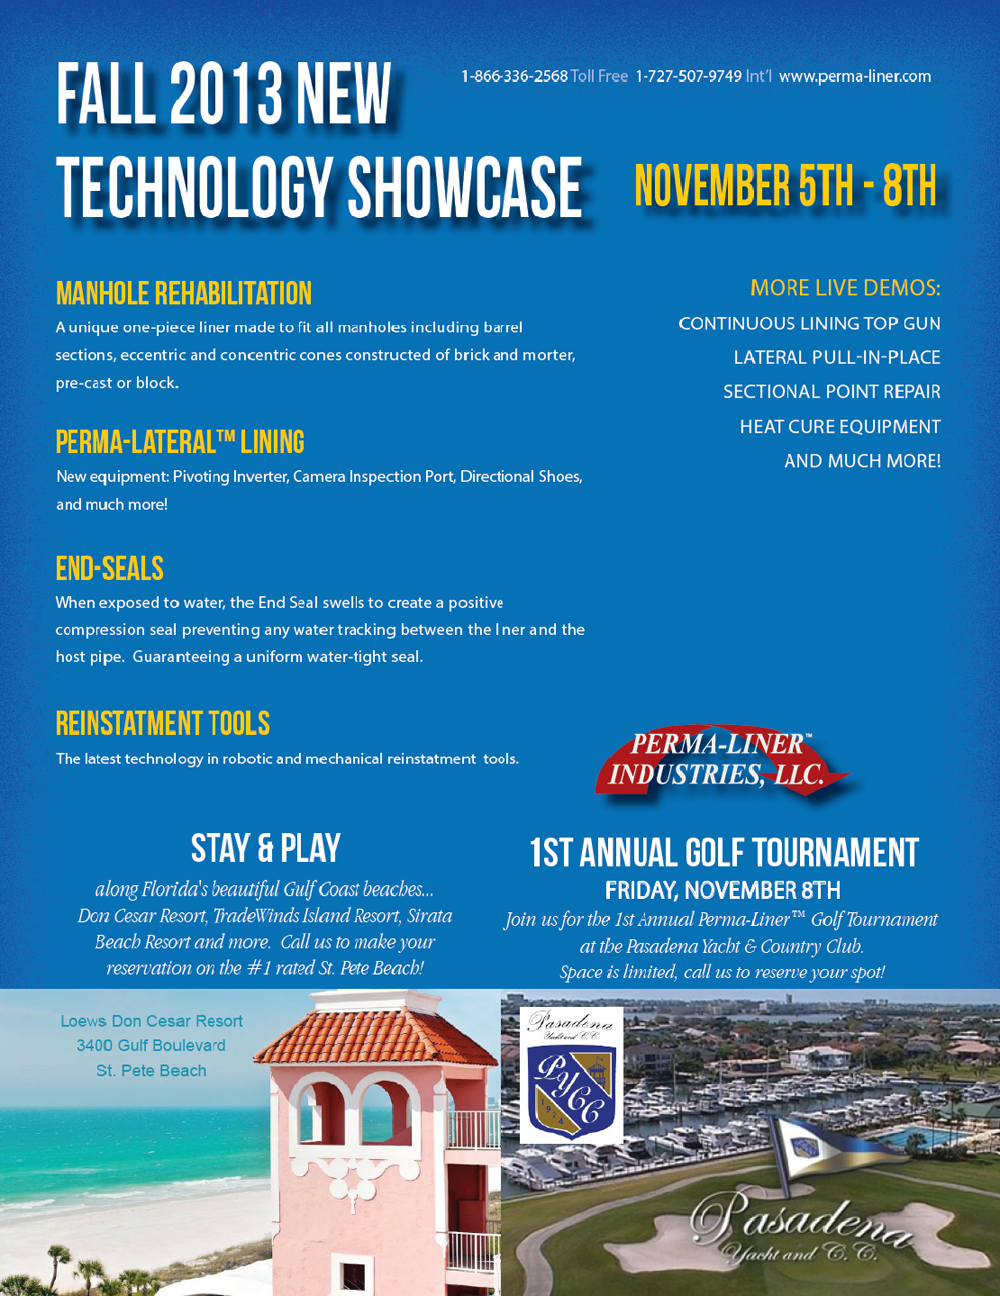 Perma-Liner Industries LLC, a trenchless repair solutions manufacturer, announces its latest Technology Showcase is scheduled for Nov. 5-8 in Clearwater, Fla. The premier Perma-Liner Golf Tournament will conclude